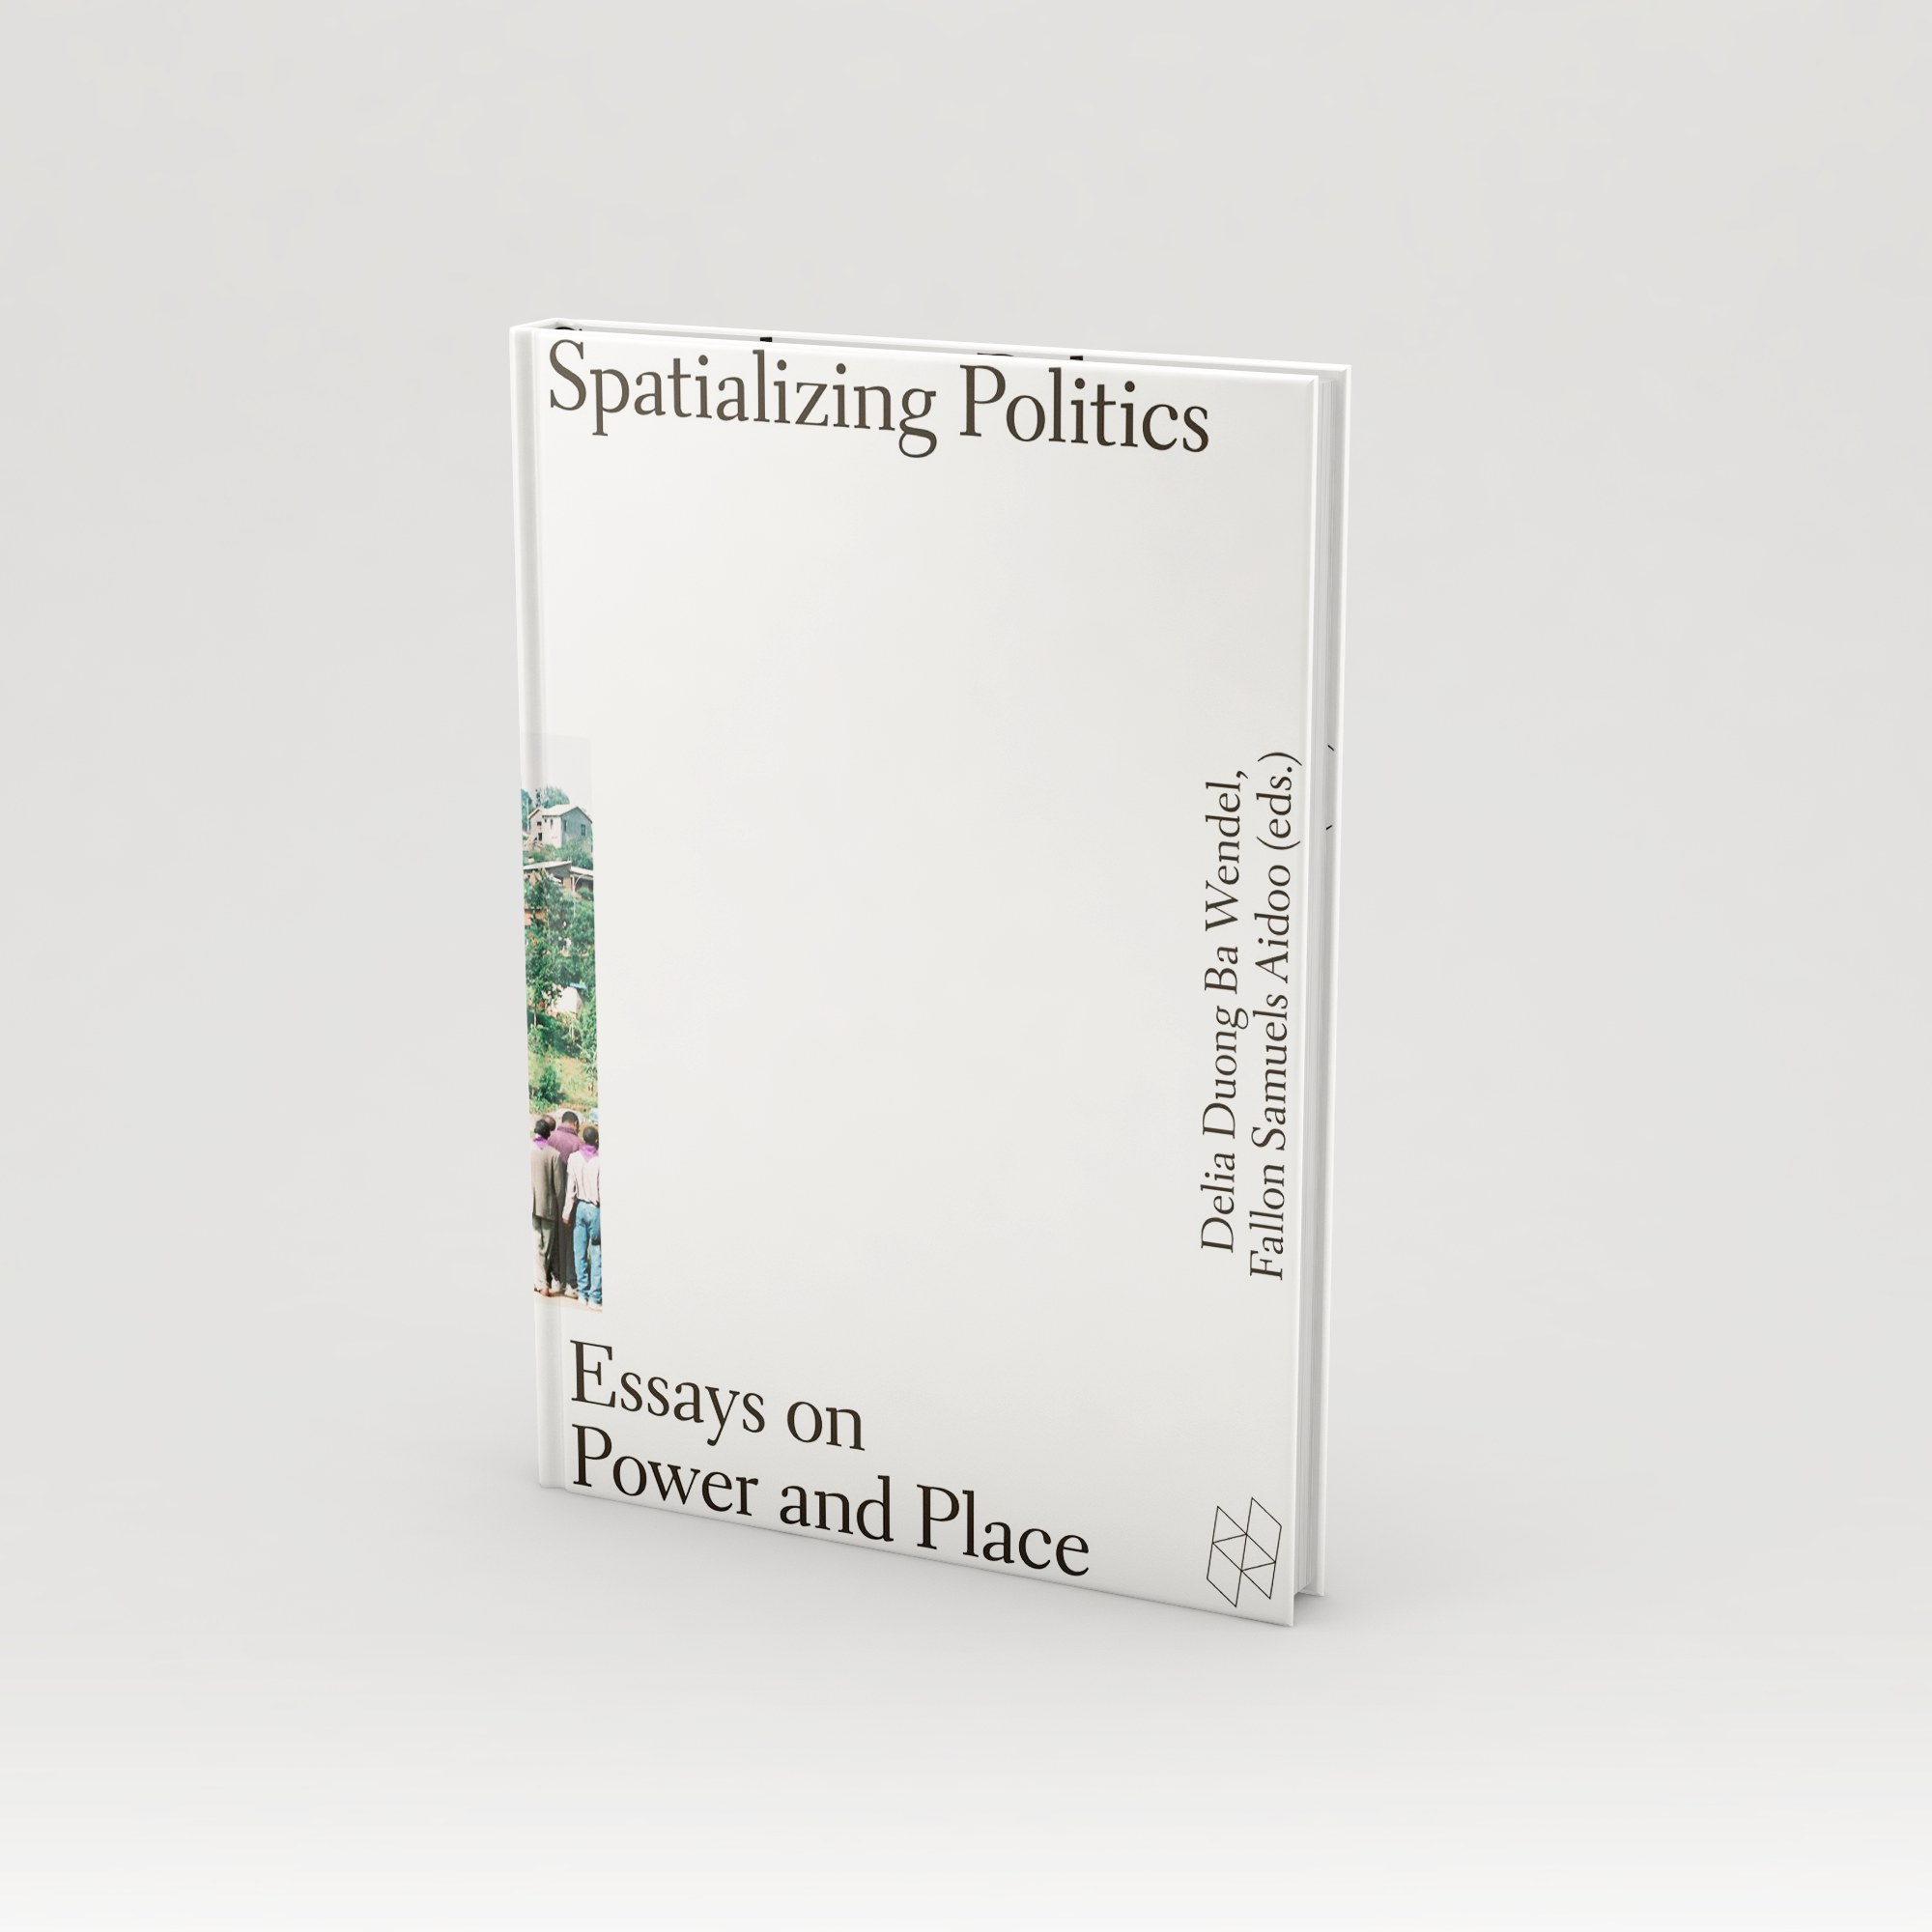 image of the book cover Spatializing Politics as a mockup